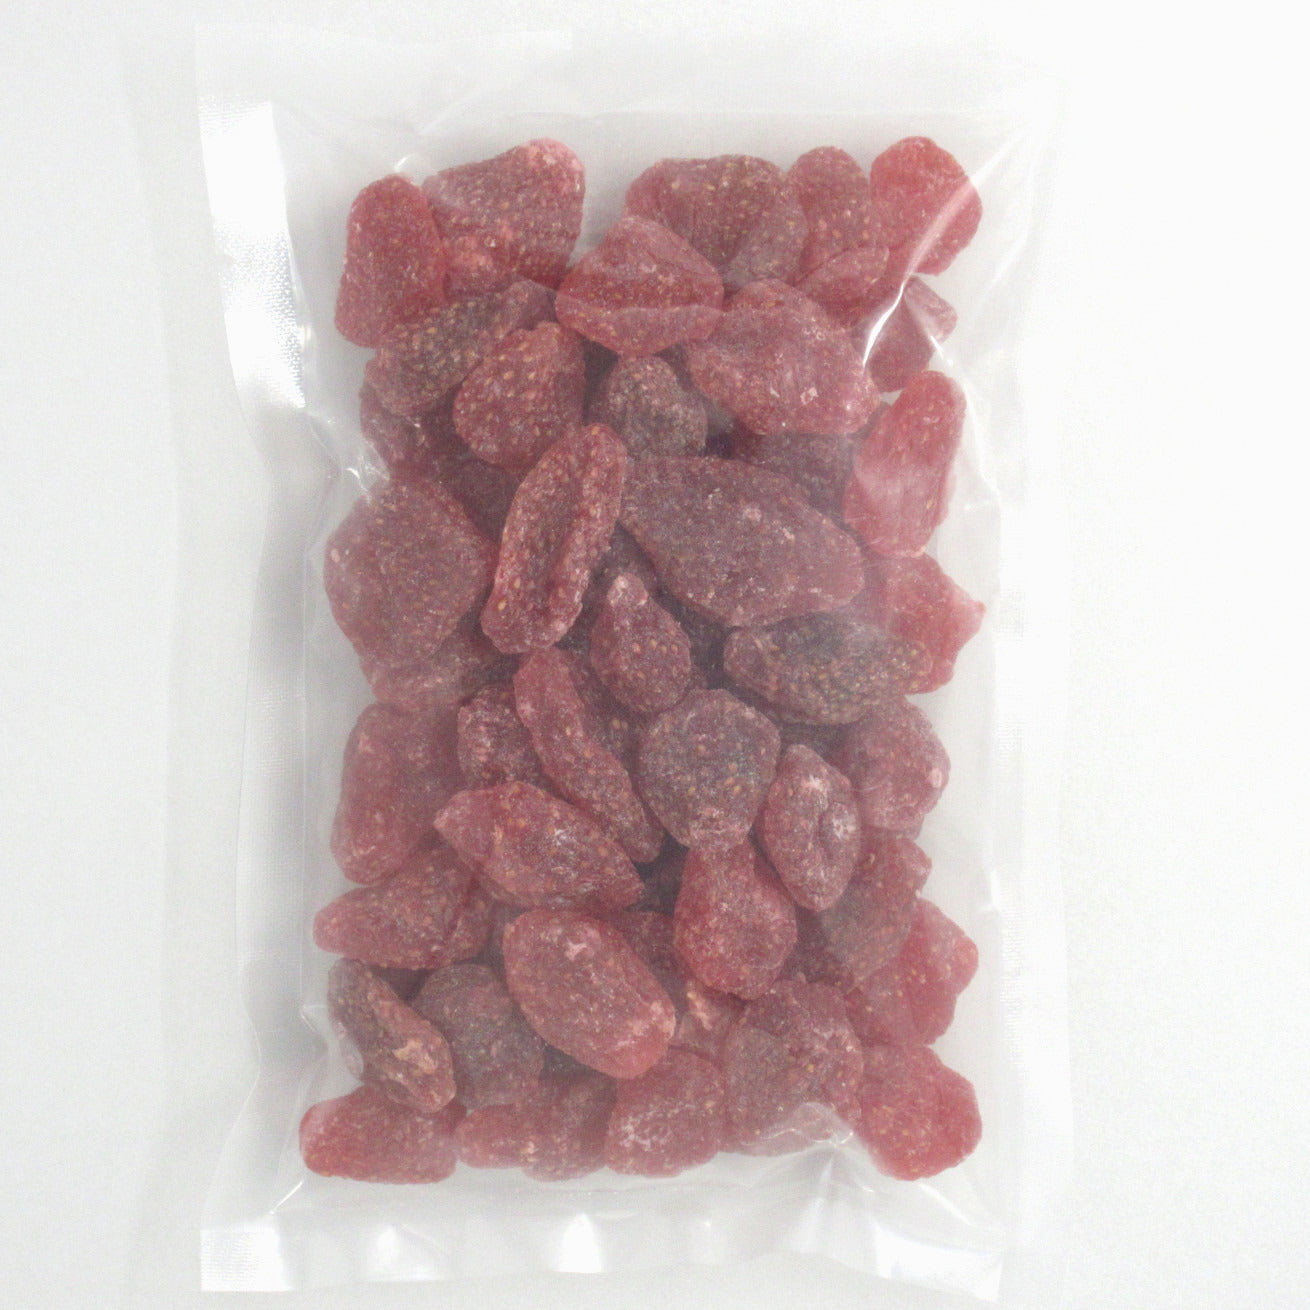 Flour Barrel product image - Dried Strawberries